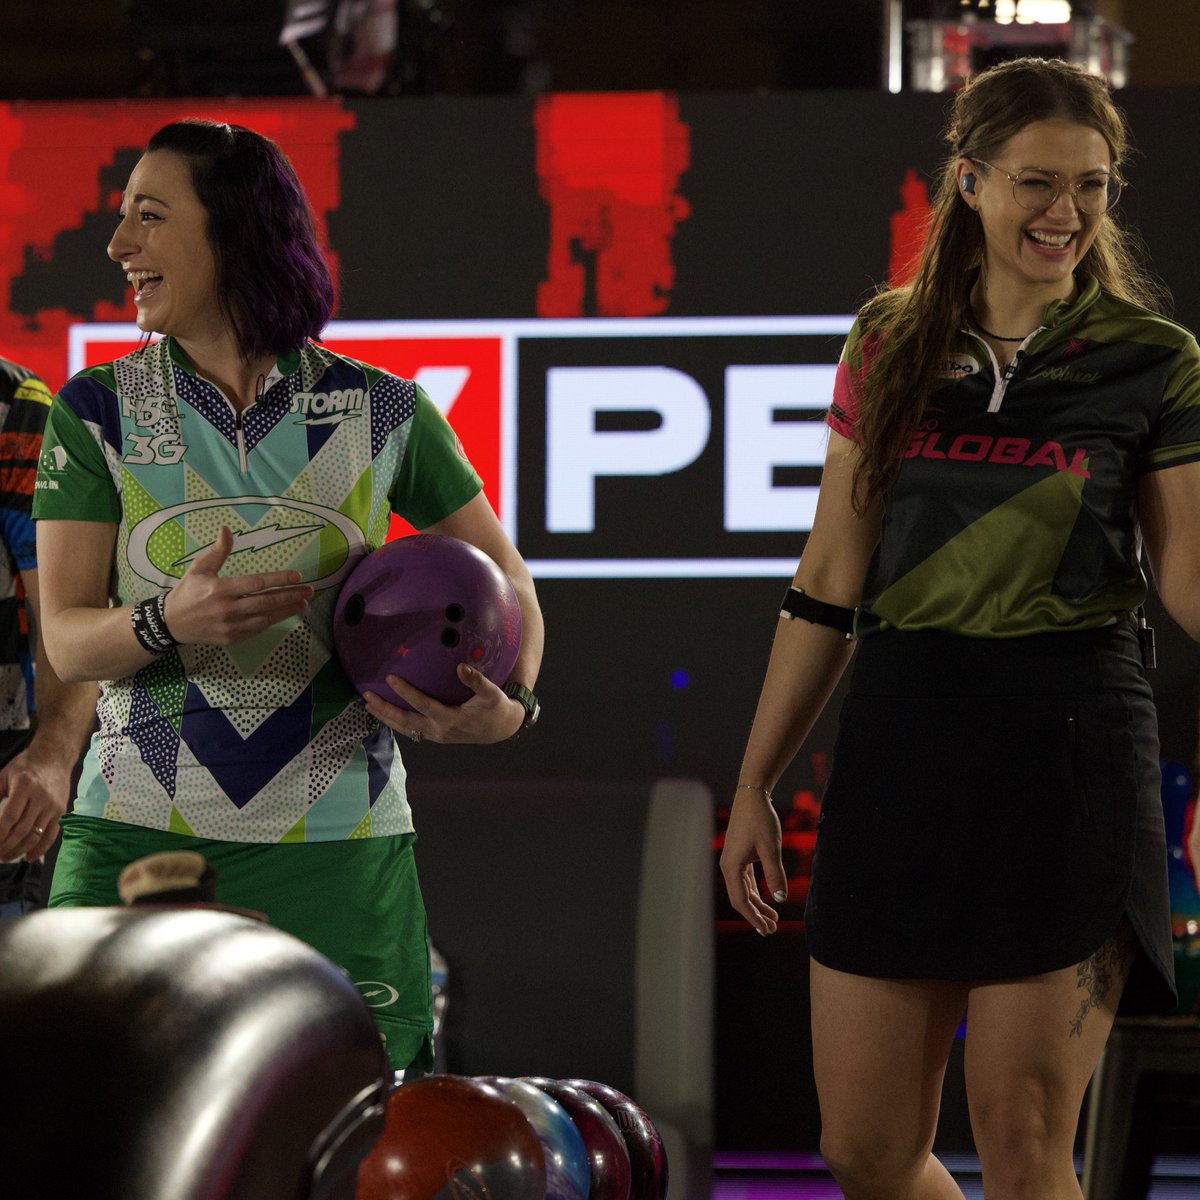 All smiles when the @PWBATour joins the party 😁

📺 Sunday, 1pm ET on FOX | FOX Sports app